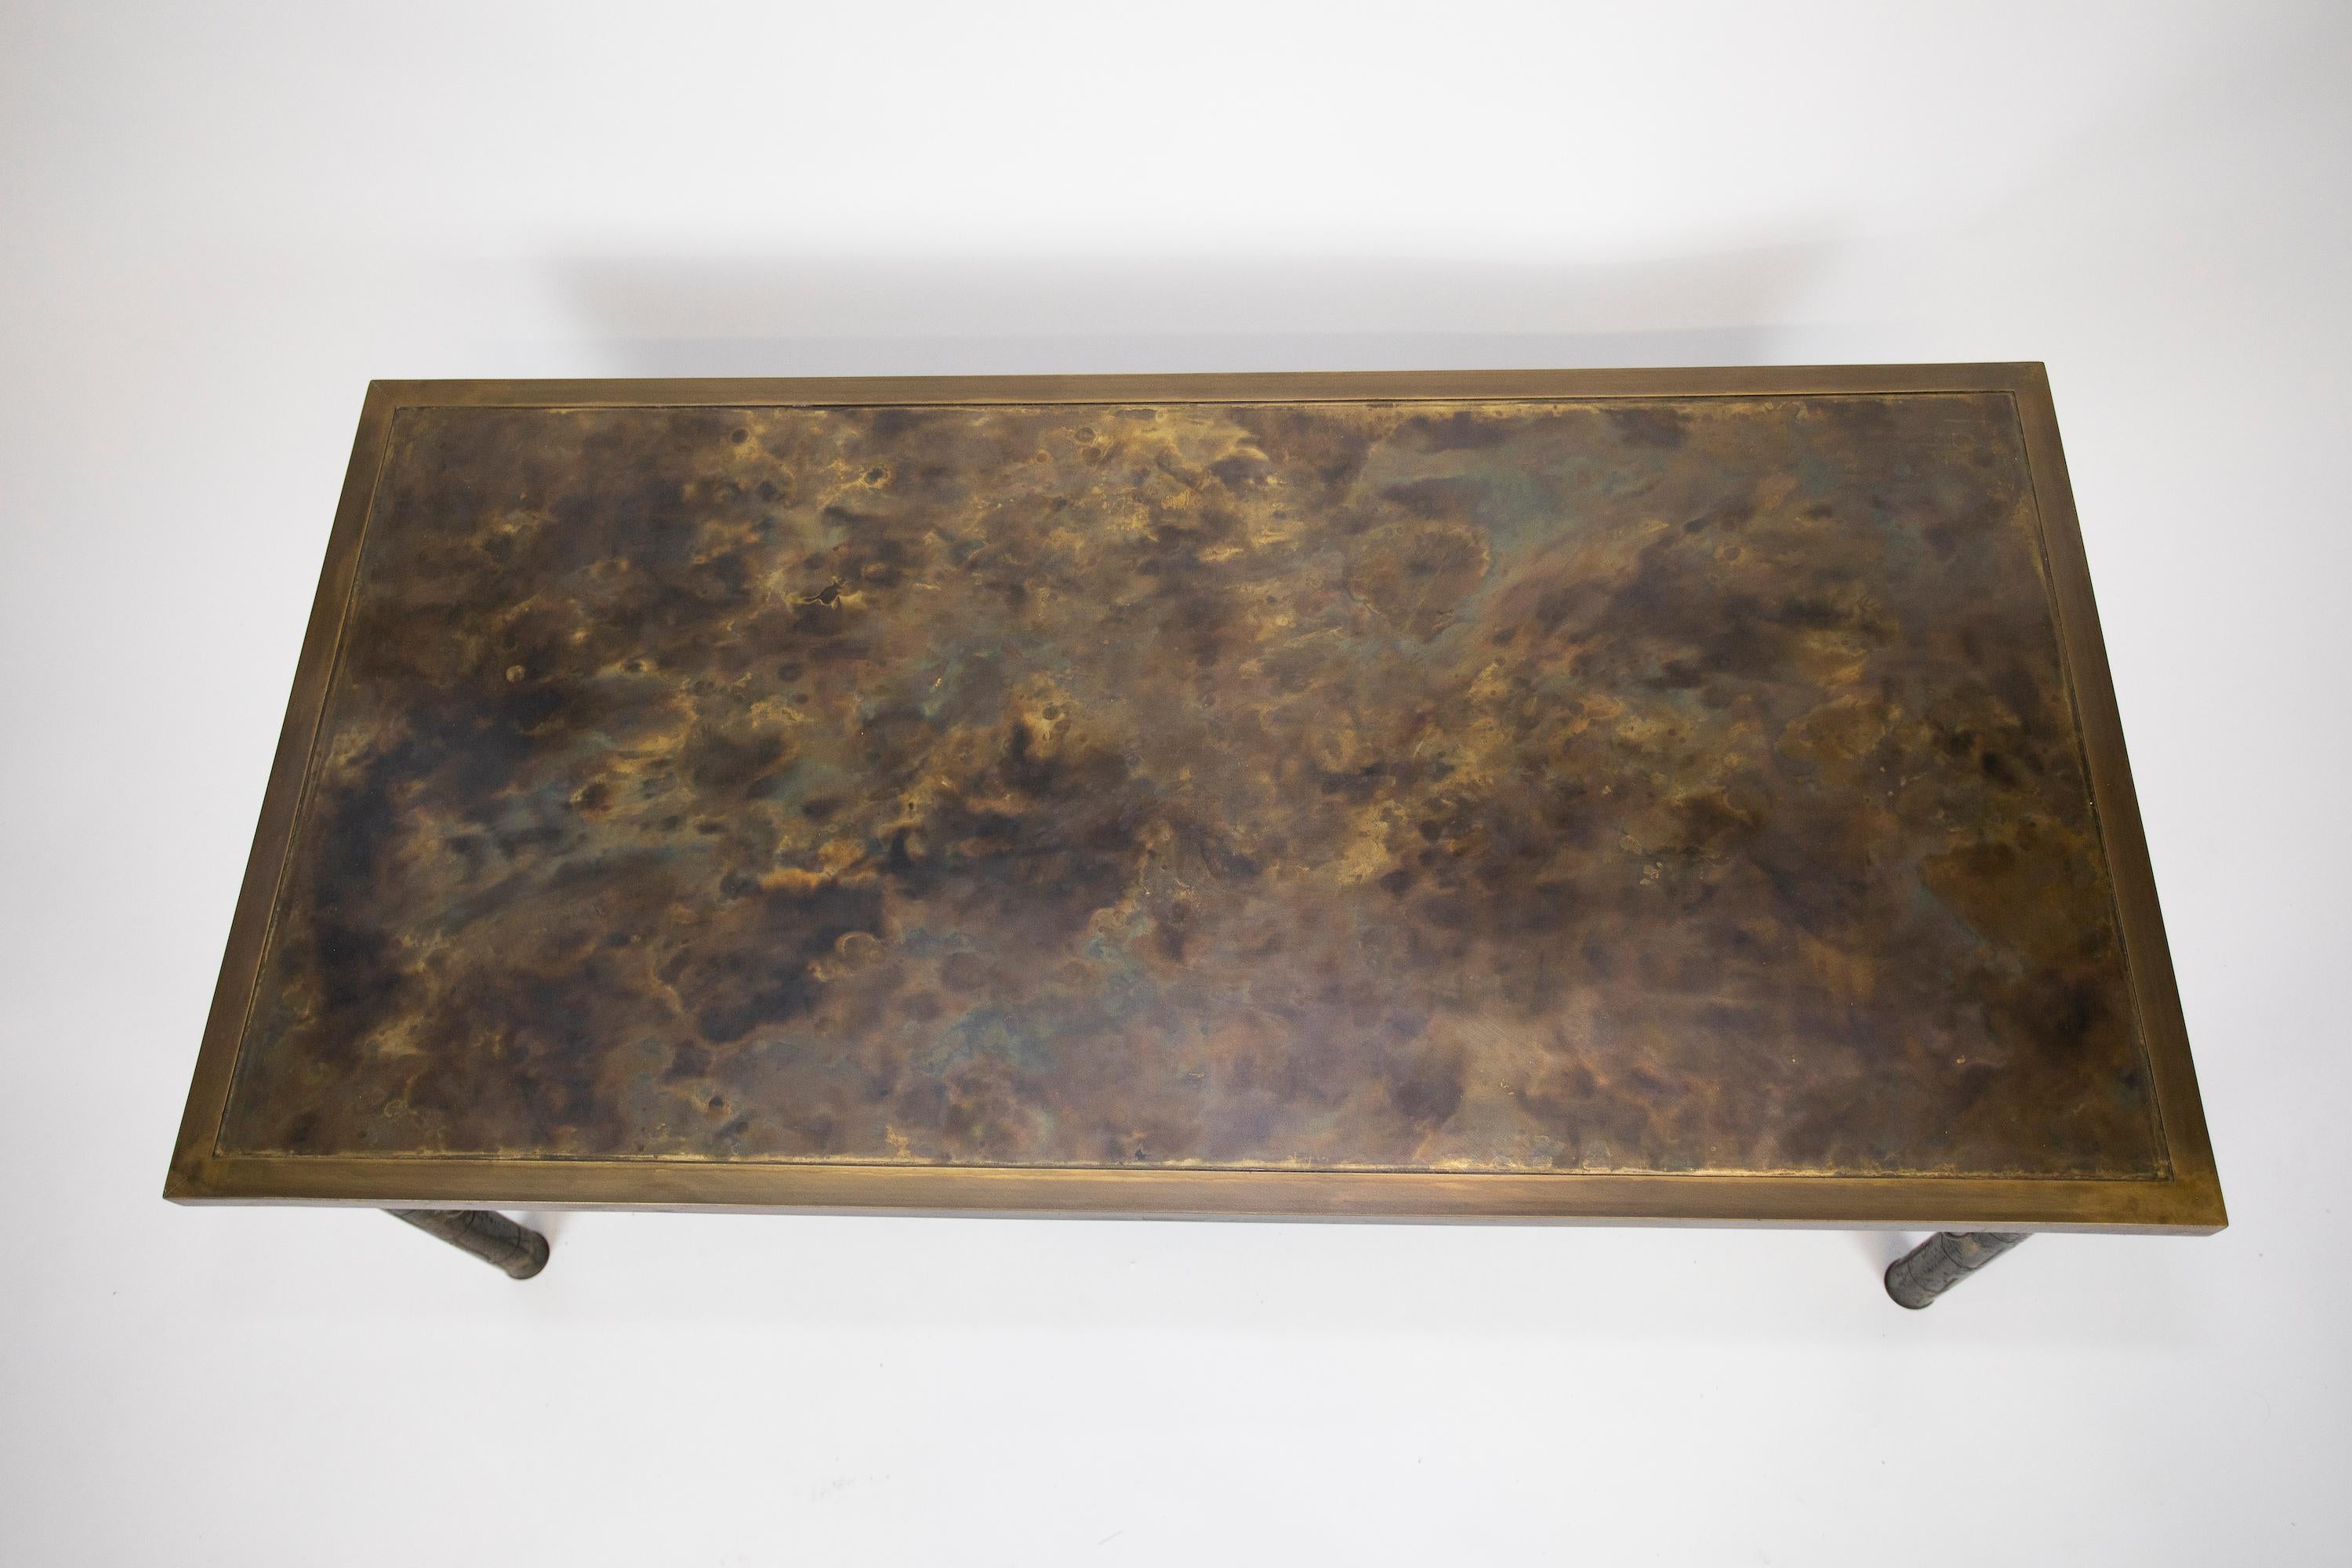 A Rectangular coffee table by Philip and Kelvin Laverne
Beautiful finish on the top surface
This table is rare because there is no image ontop
signed.